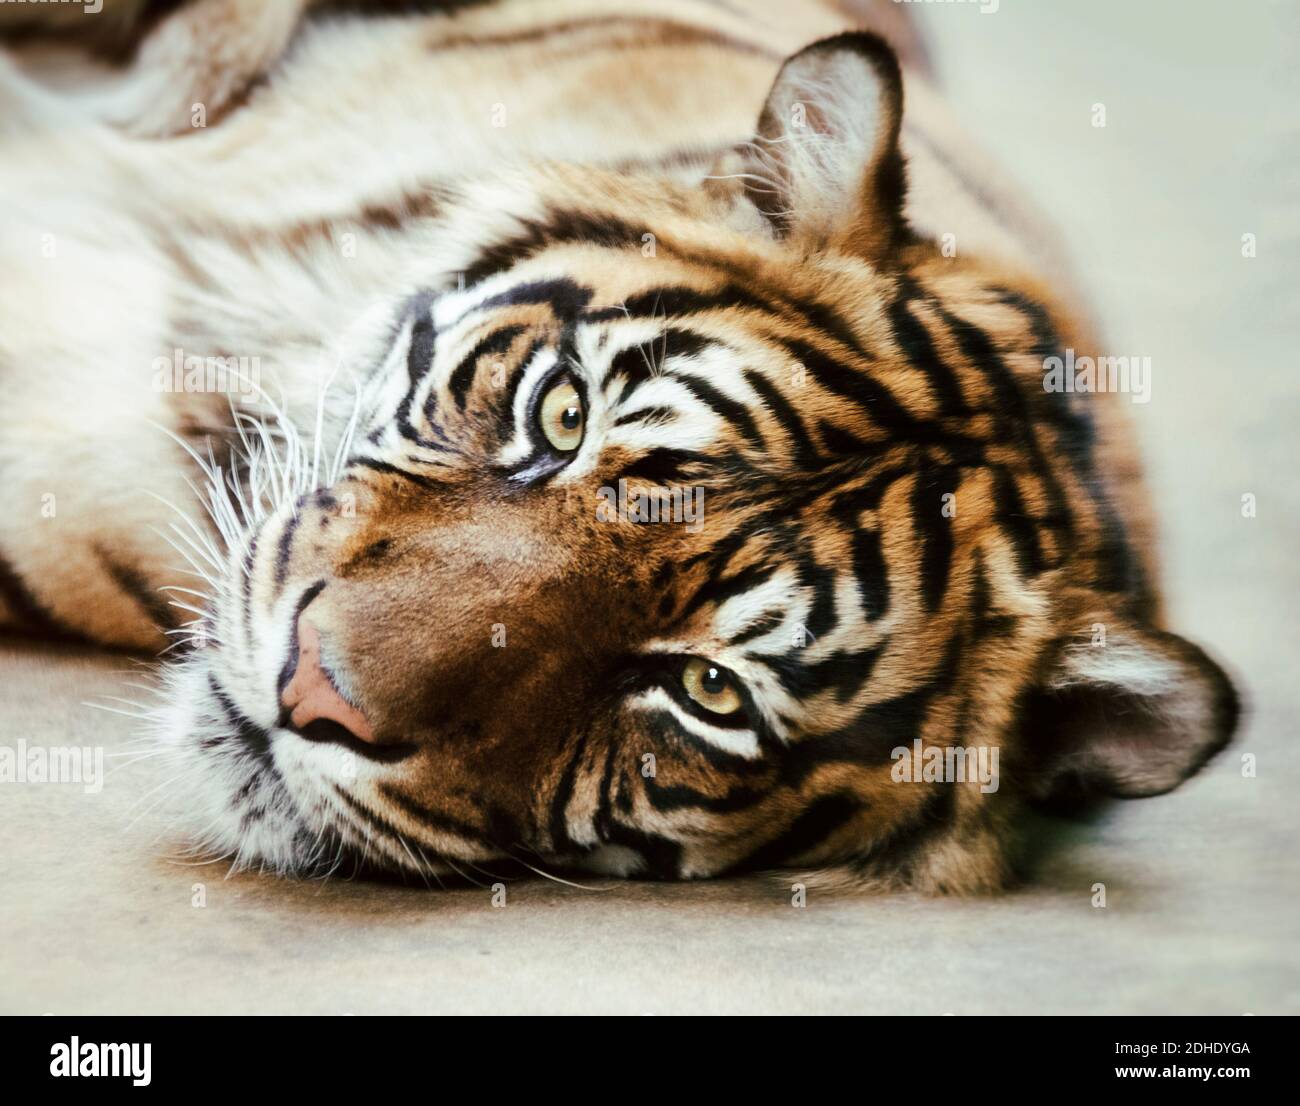 Tiger, portrait of a bengal tiger. Stock Photo